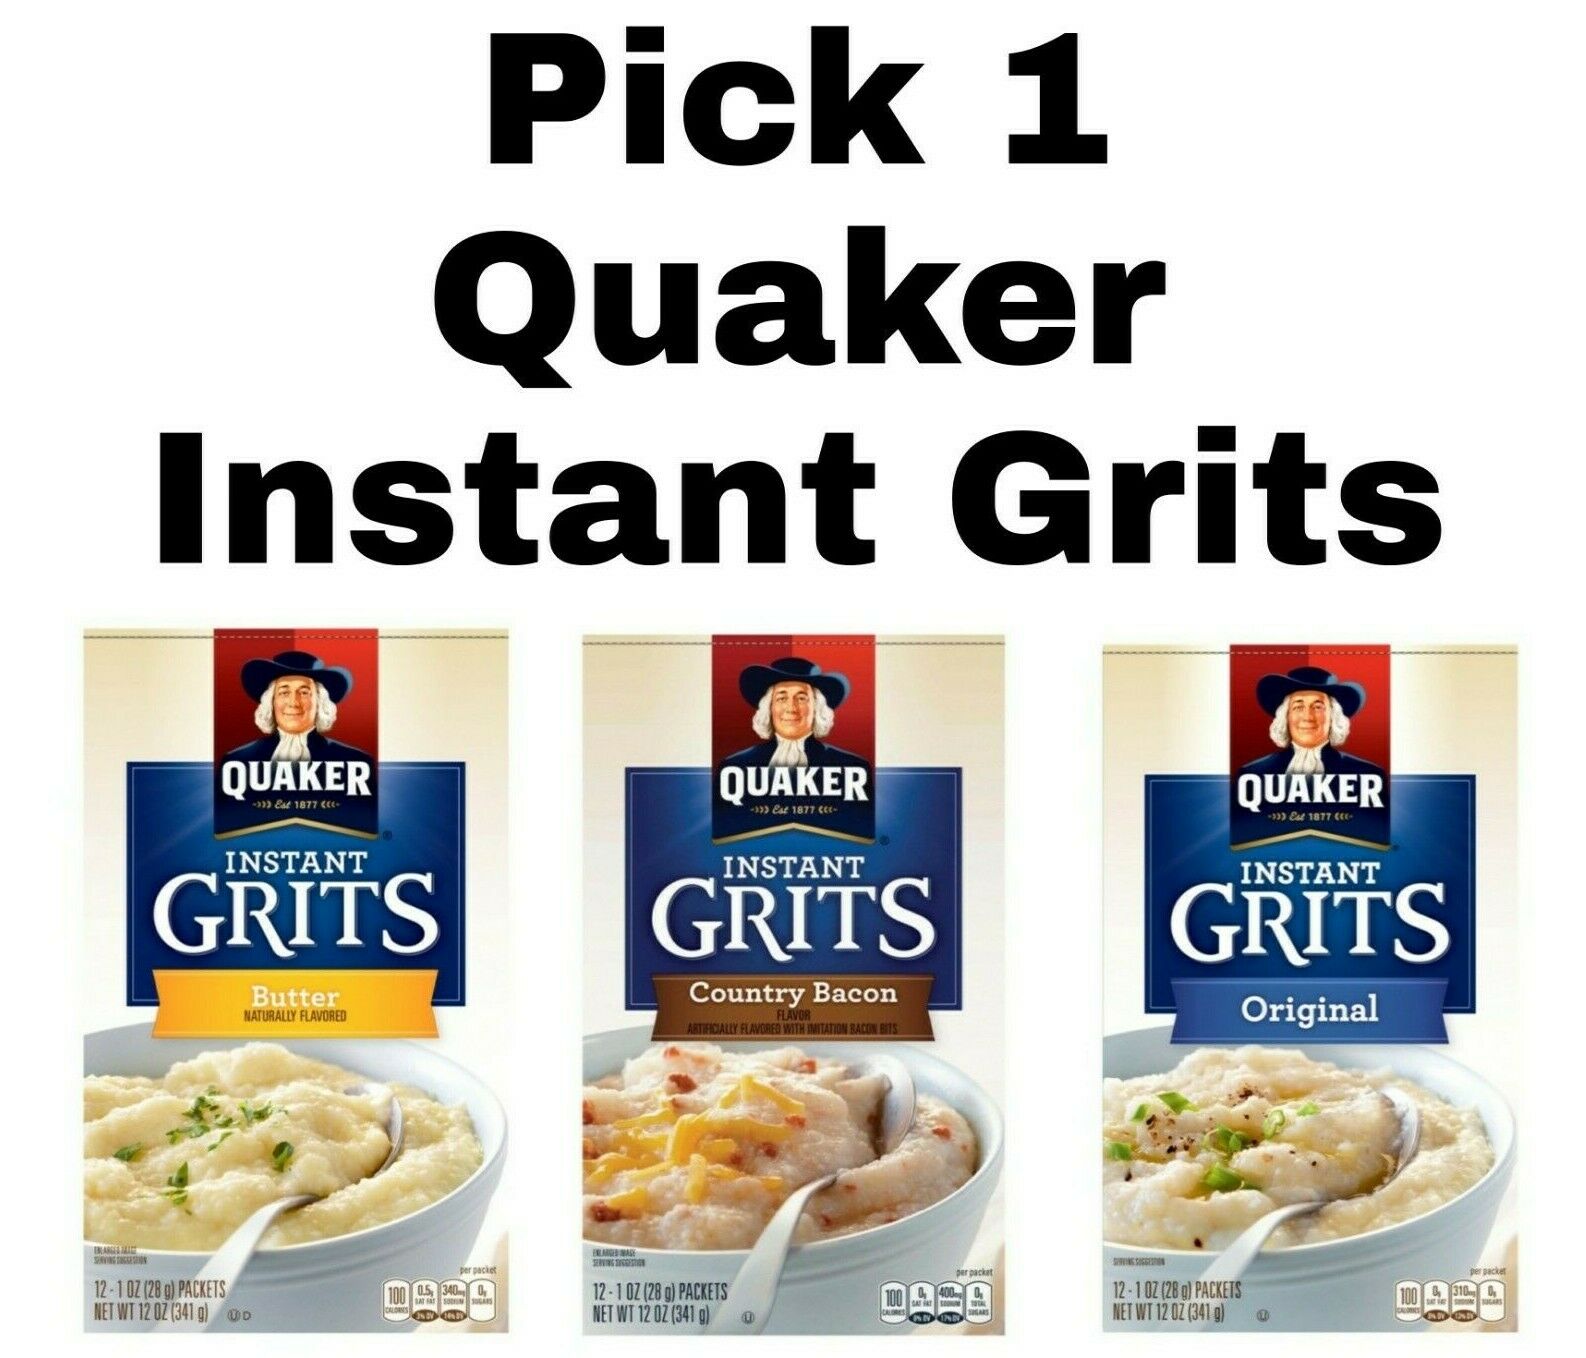 Pick 1 Quaker Instant Grits 12 Oz Box: Butter, Country Bacon Or Original